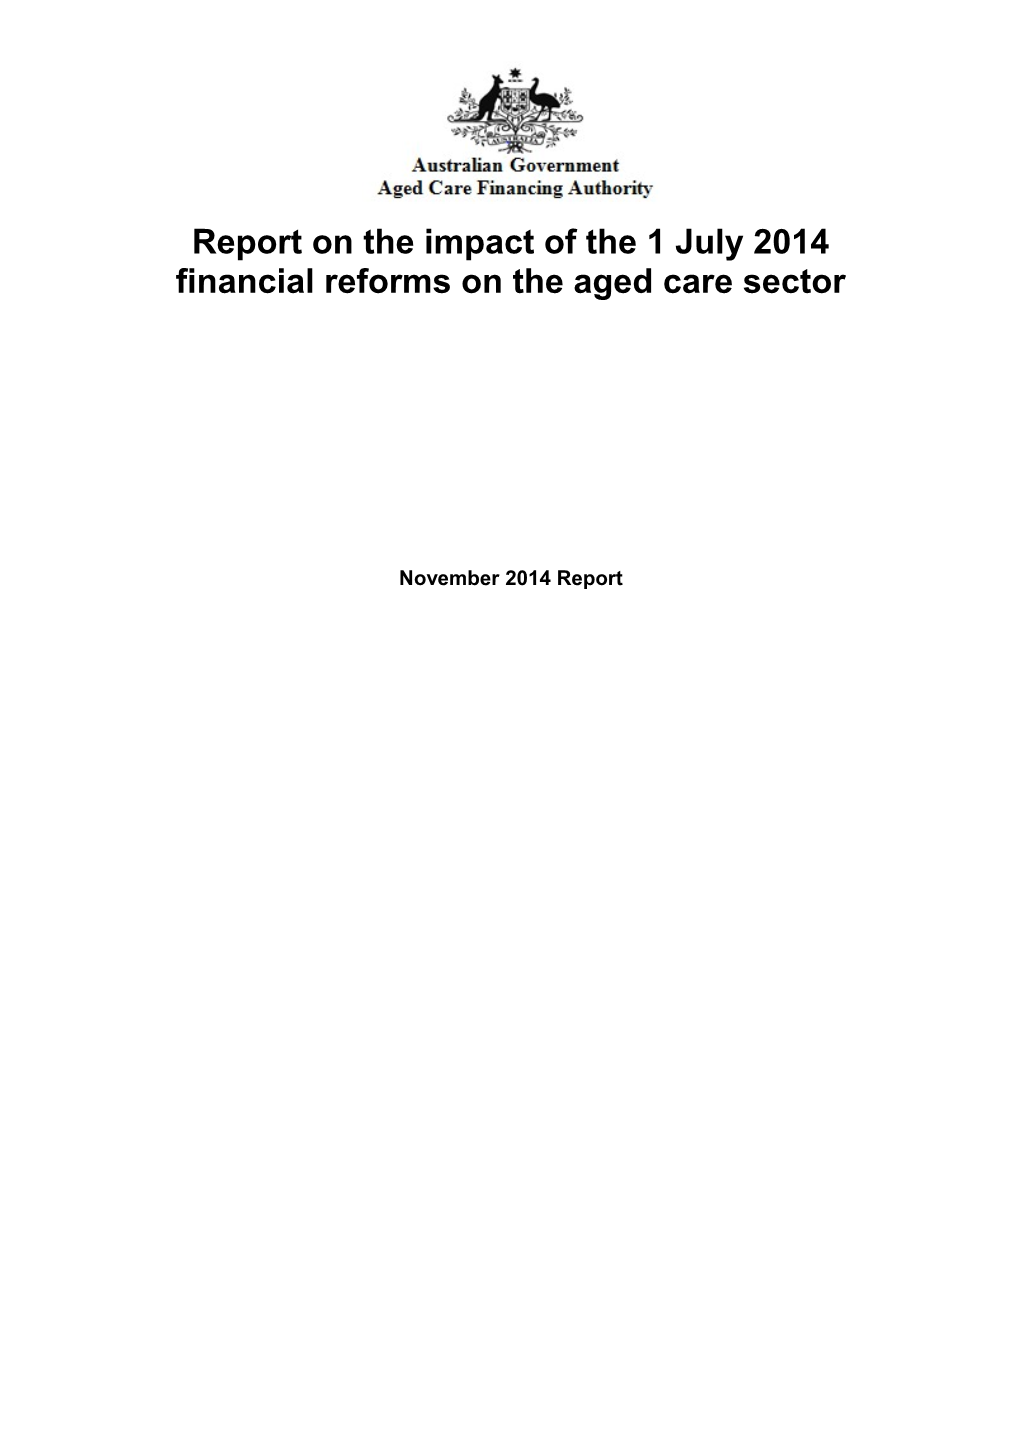 Report on the Impact of the 1 July 2014 Financial Reforms on the Aged Care Sector